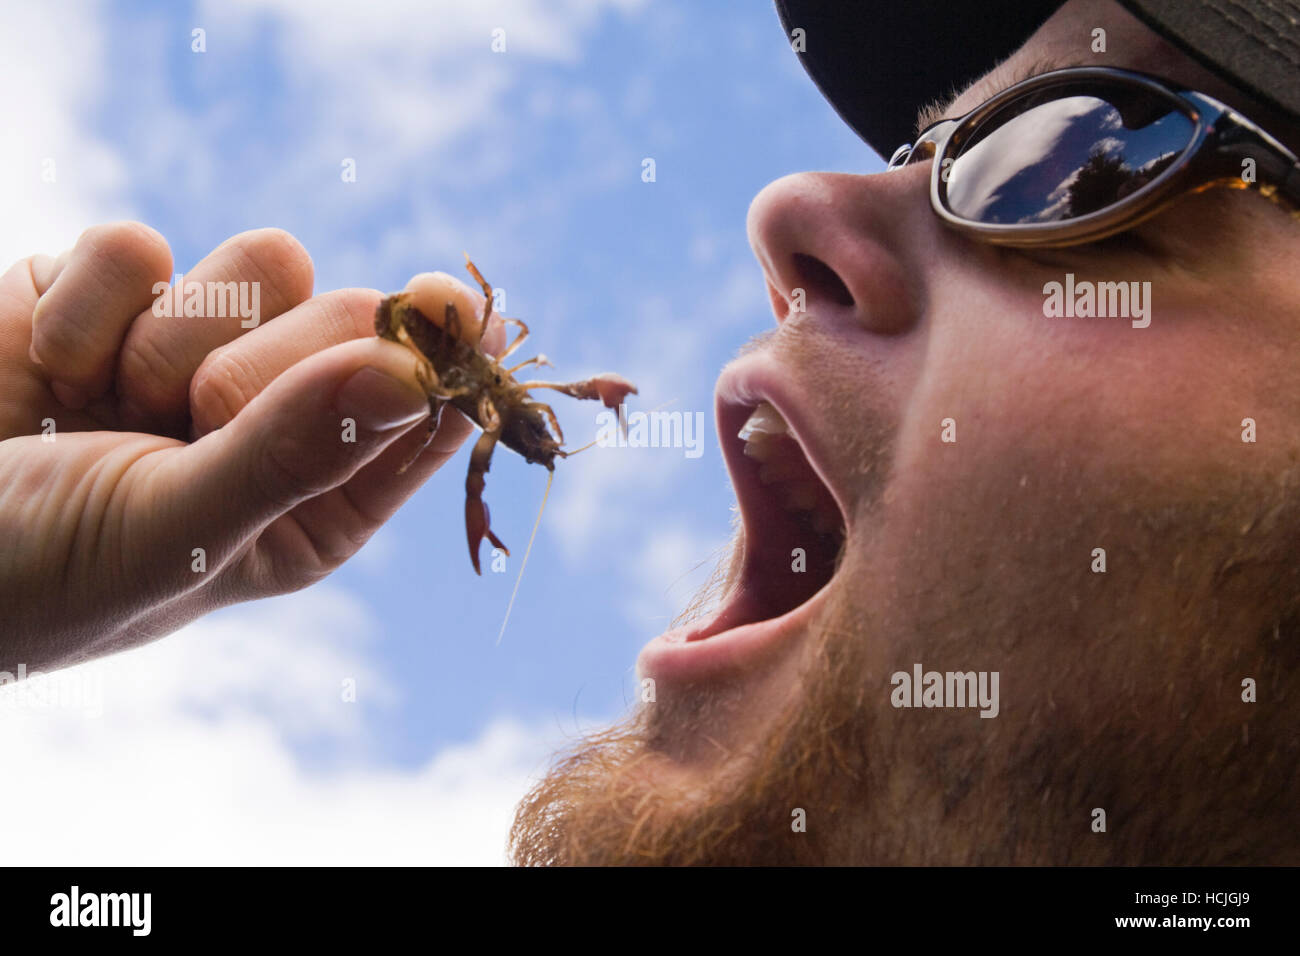 Ryan Klett jokes about eating a small crawfish he found in the Cle Elum River near Cle Elum, Washington. Stock Photo